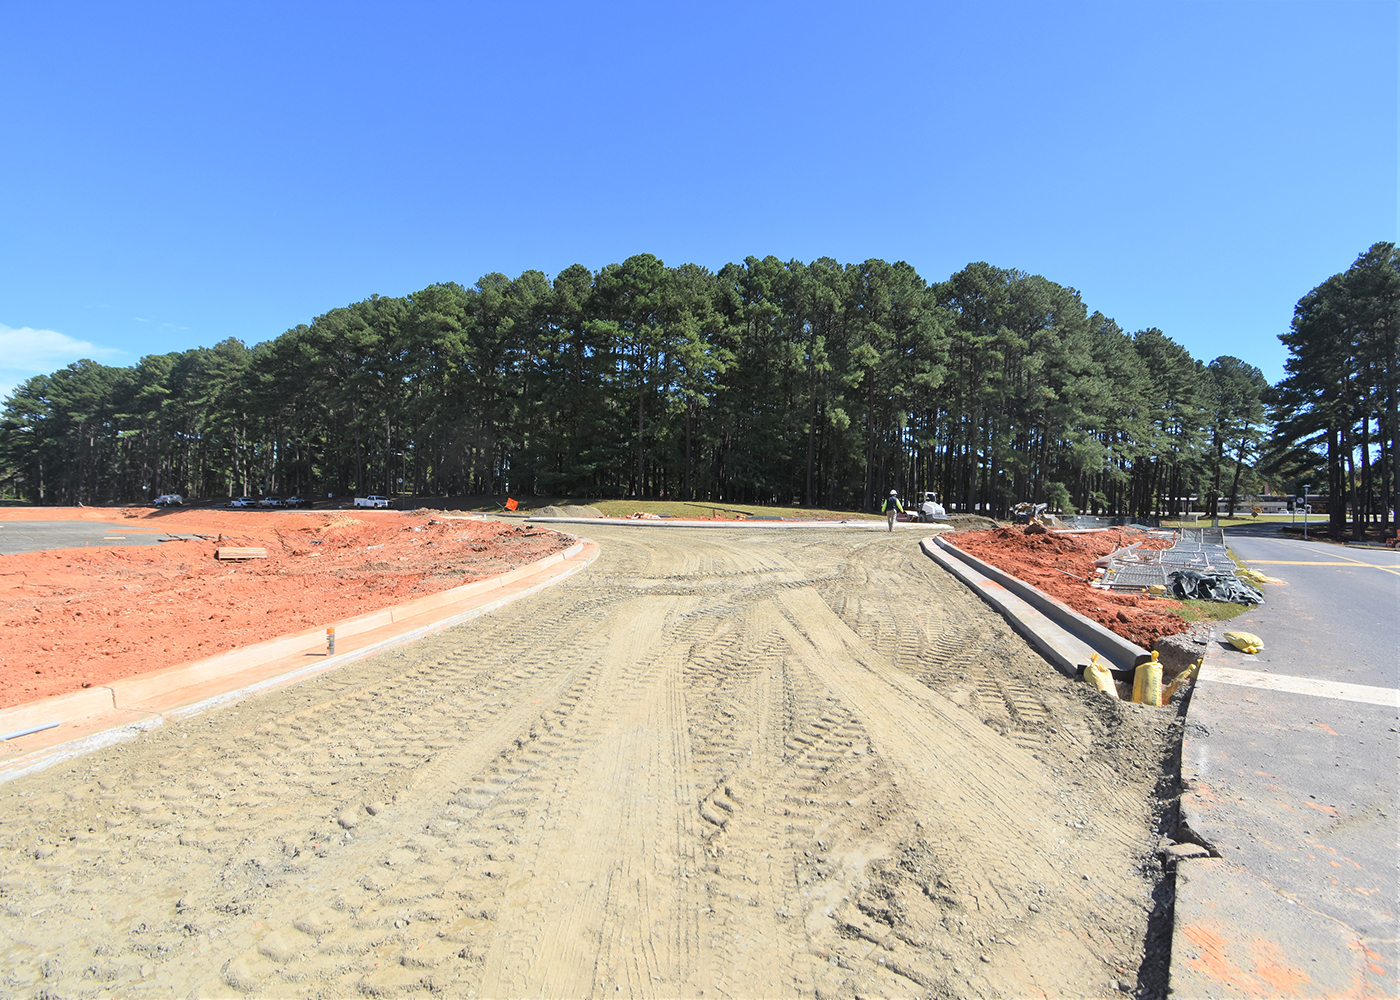 New curbing shows the entrance to the traffic circle. The building site is the gray area on the left, 10/6/2022.